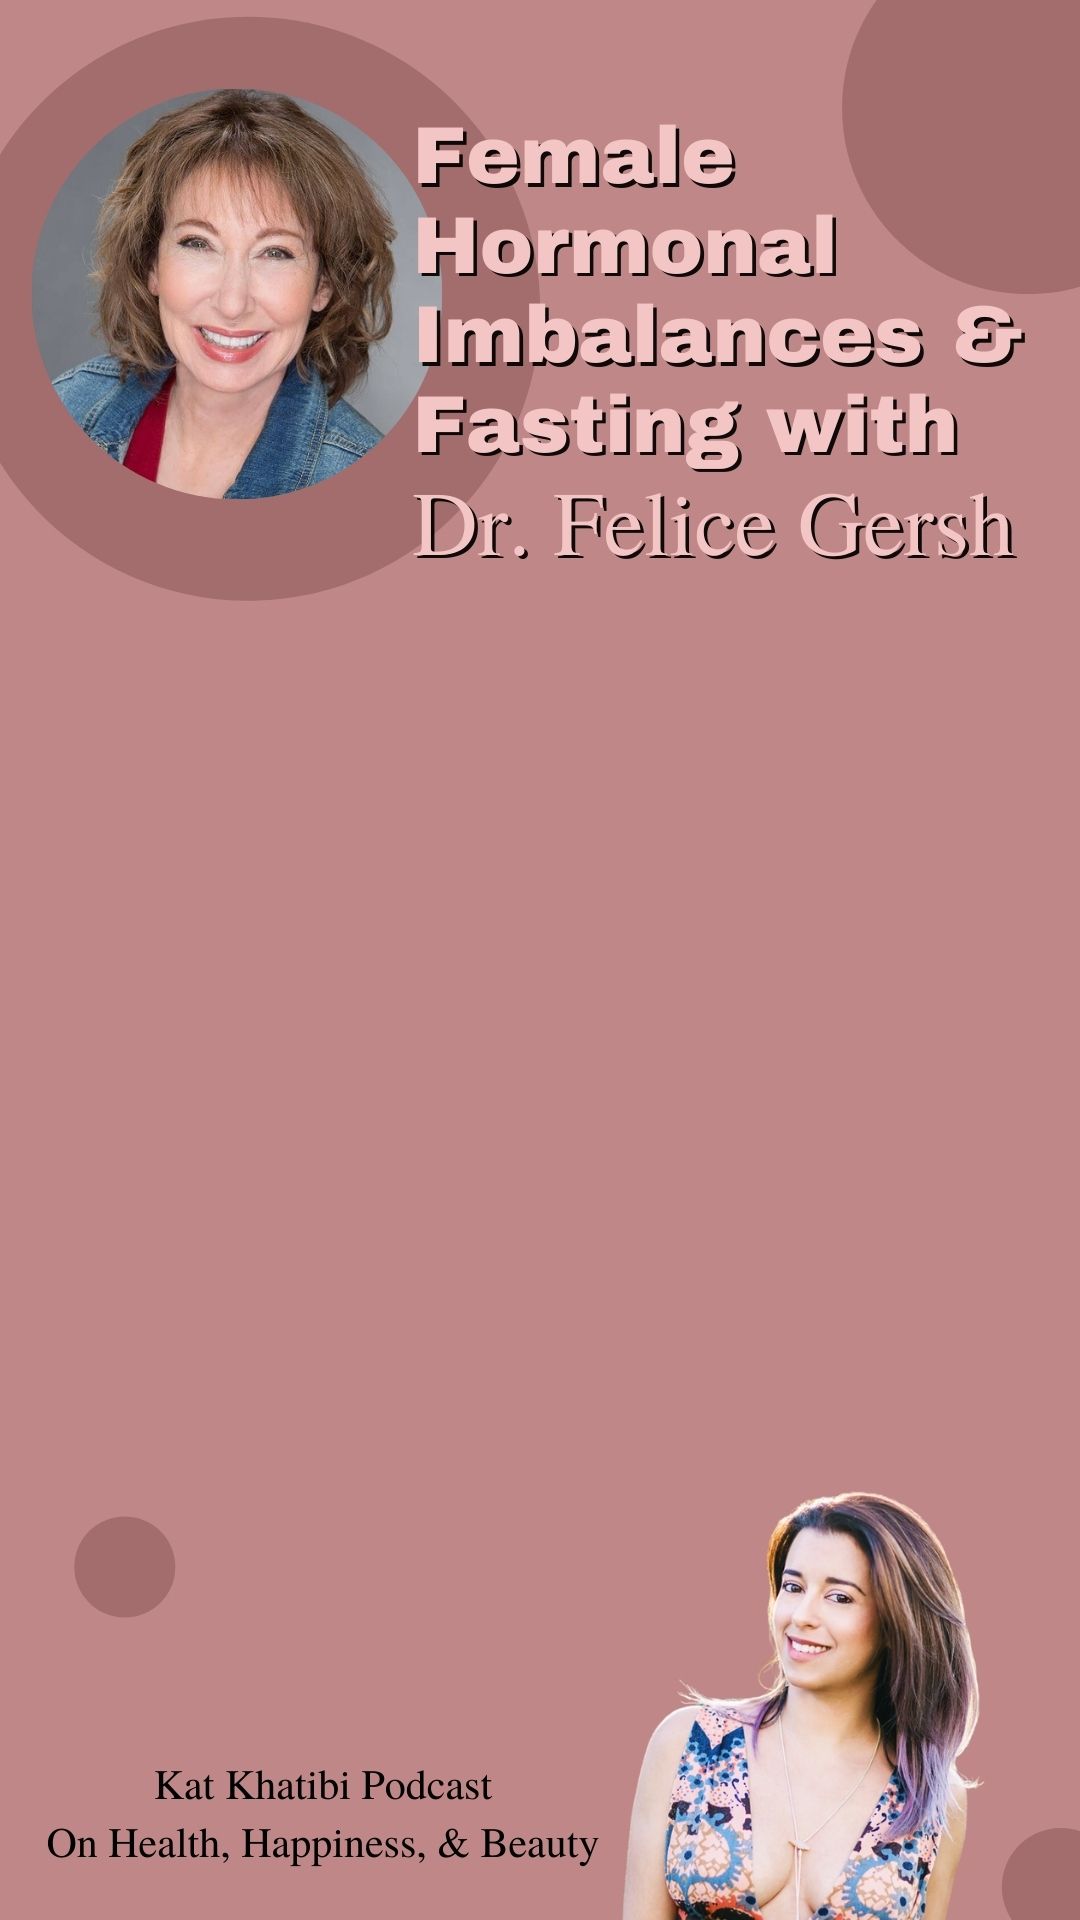 Female Hormonal Imbalances and Fasting with Dr. Felice Gersh